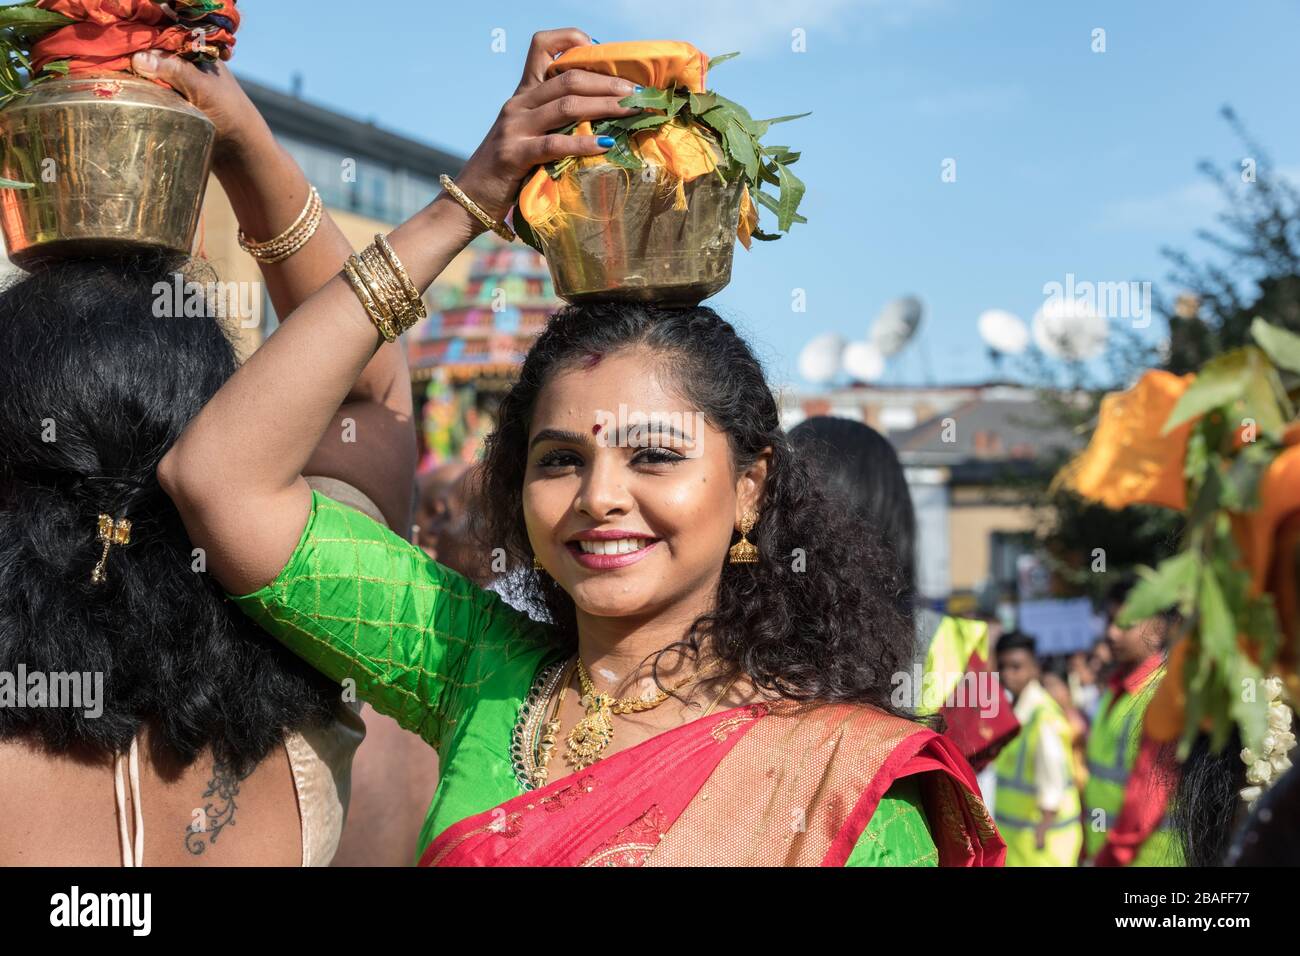 Young Hindu woman in sari, smiling as she participates in a  Chariot Festival procession, carries offering on her head Stock Photo